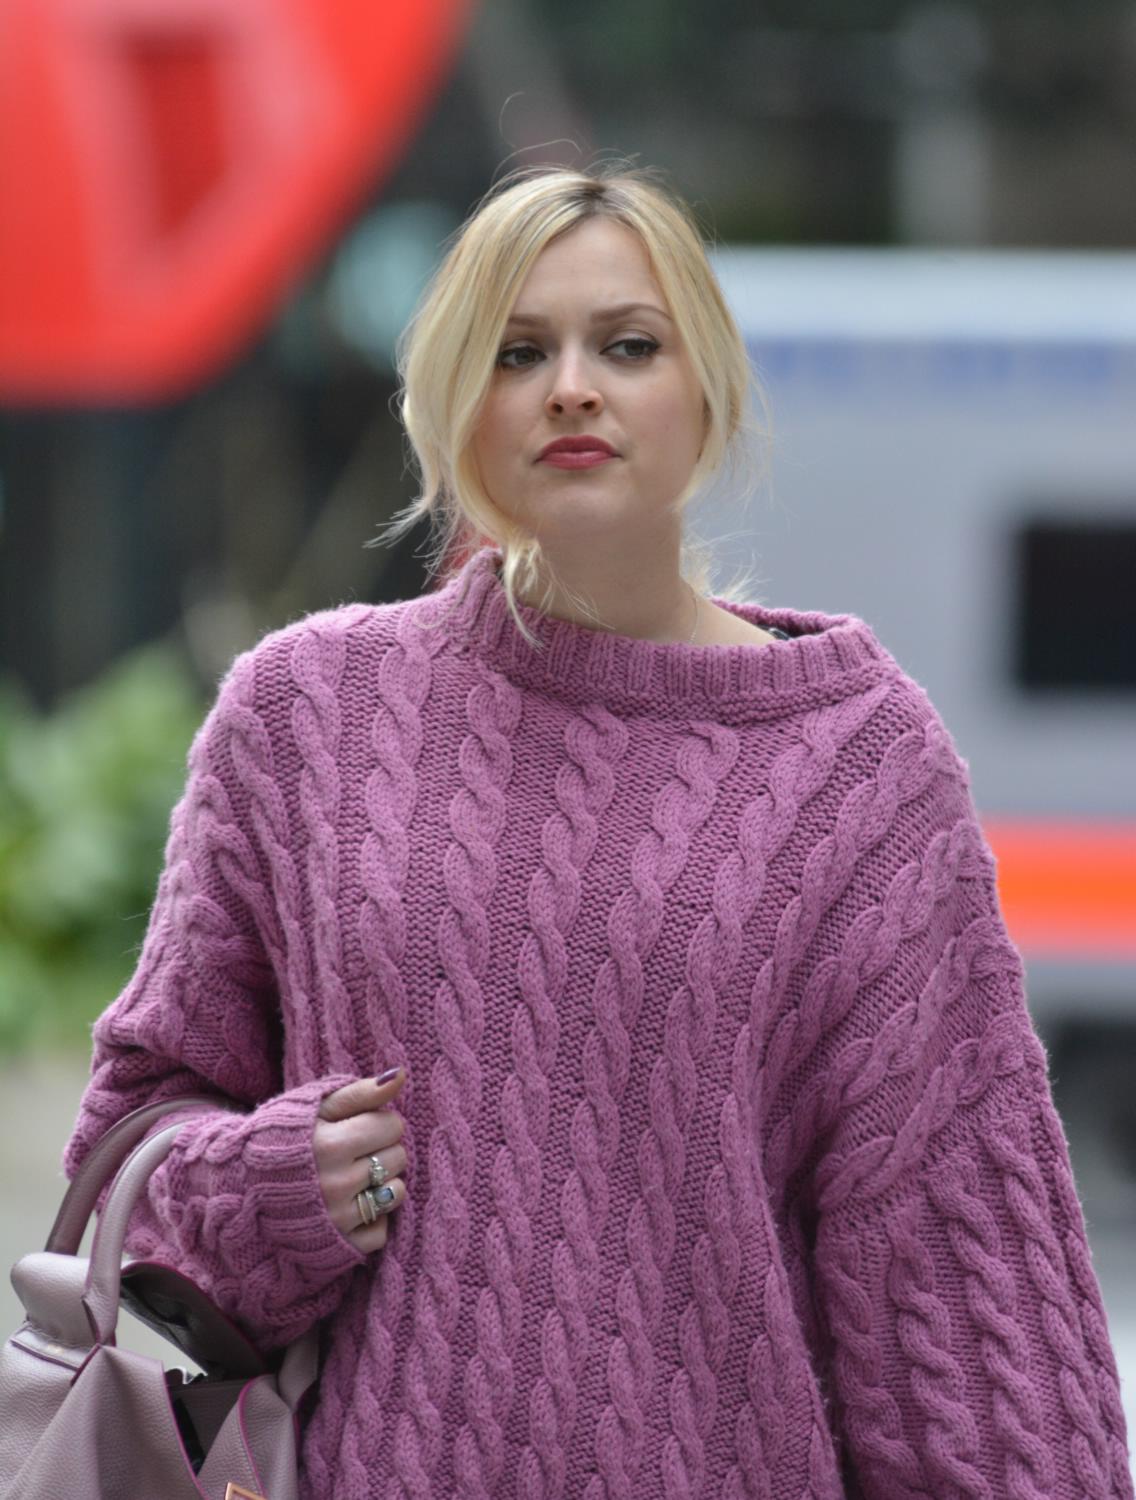 Fearne Cotton in Pink Jumper out in London